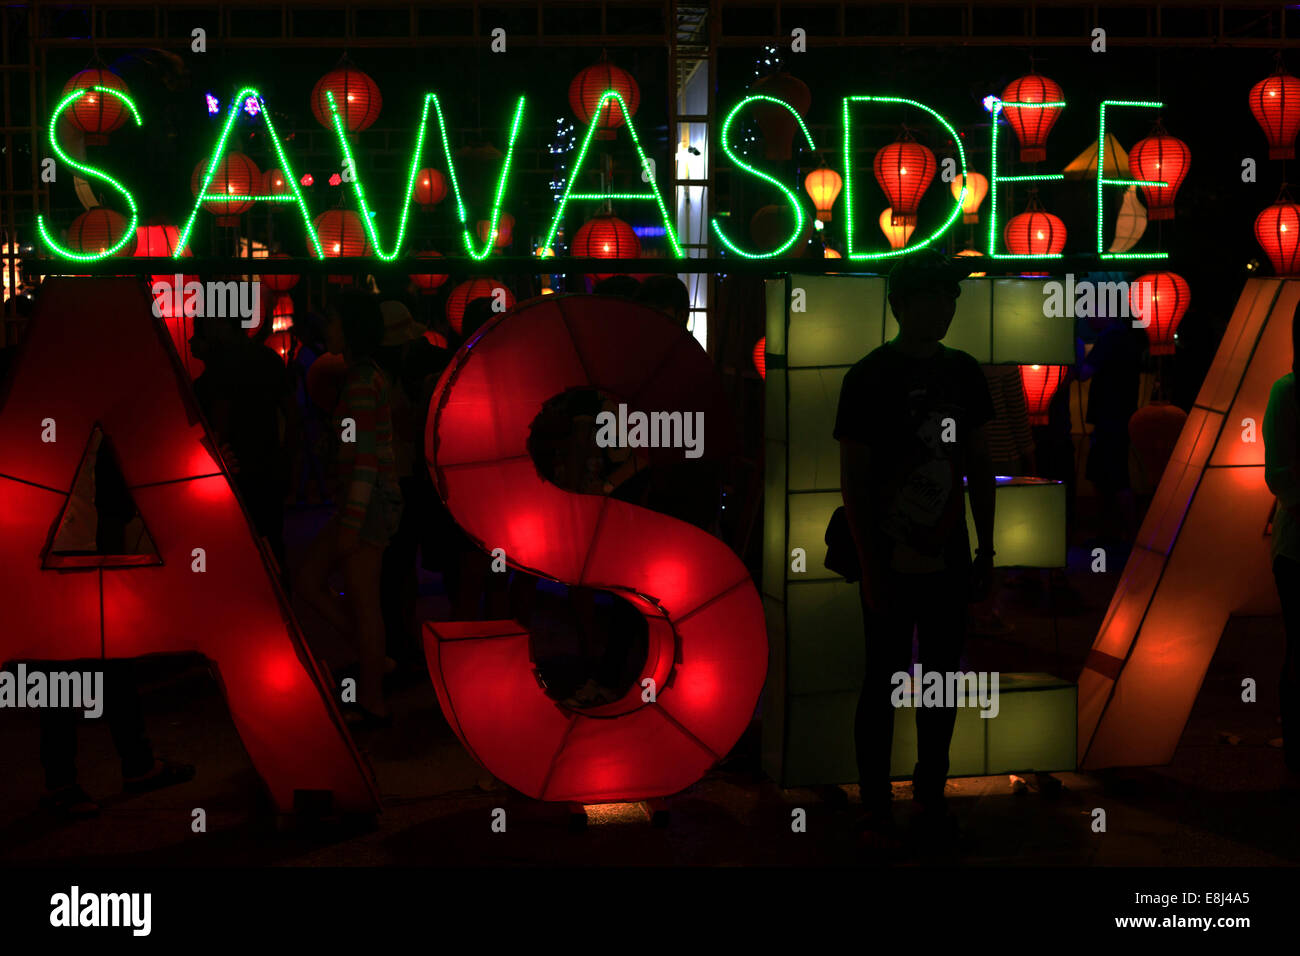 'Sawasdee' lettering in neon lights, 'welcome' to the Loi Krathong festival of lights, Thapae Gate, Chiang Mai, Thailand Stock Photo